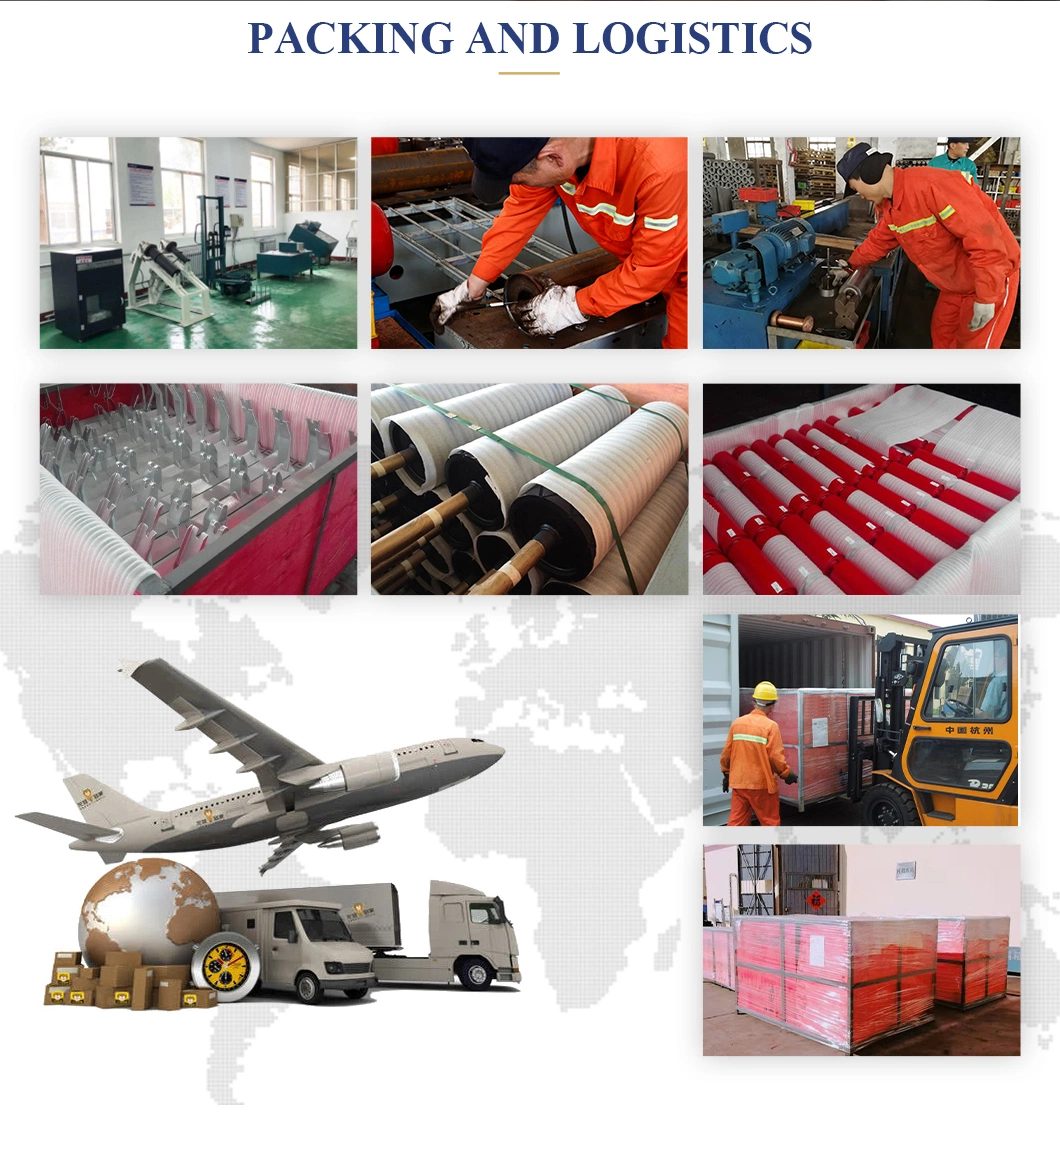 China Manufacture Heavy Duty Steel Rubber Coated HDPE Self Aligning Return Trough Carrier Conveyor Idler Roller Price for Mining Belt Conveyor System